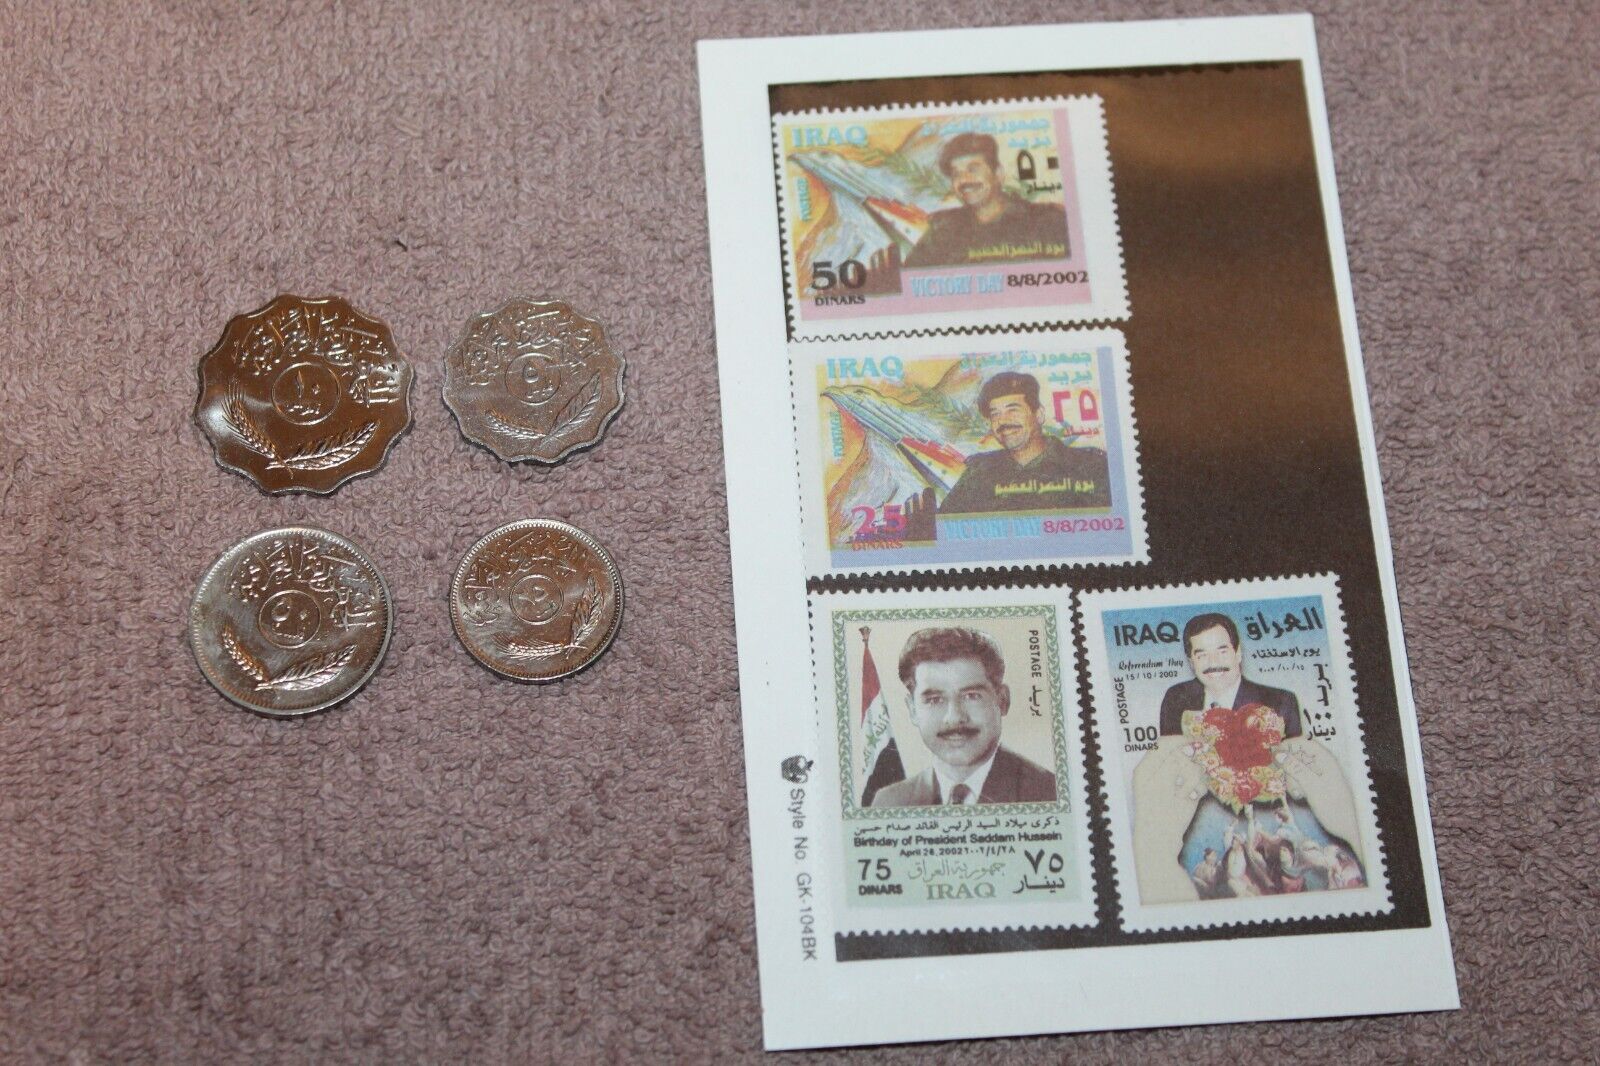 Original Pre 2003 Iraqi Coin and Stamp Lot, 4 Coins & 4 Saddam Stamps in Total